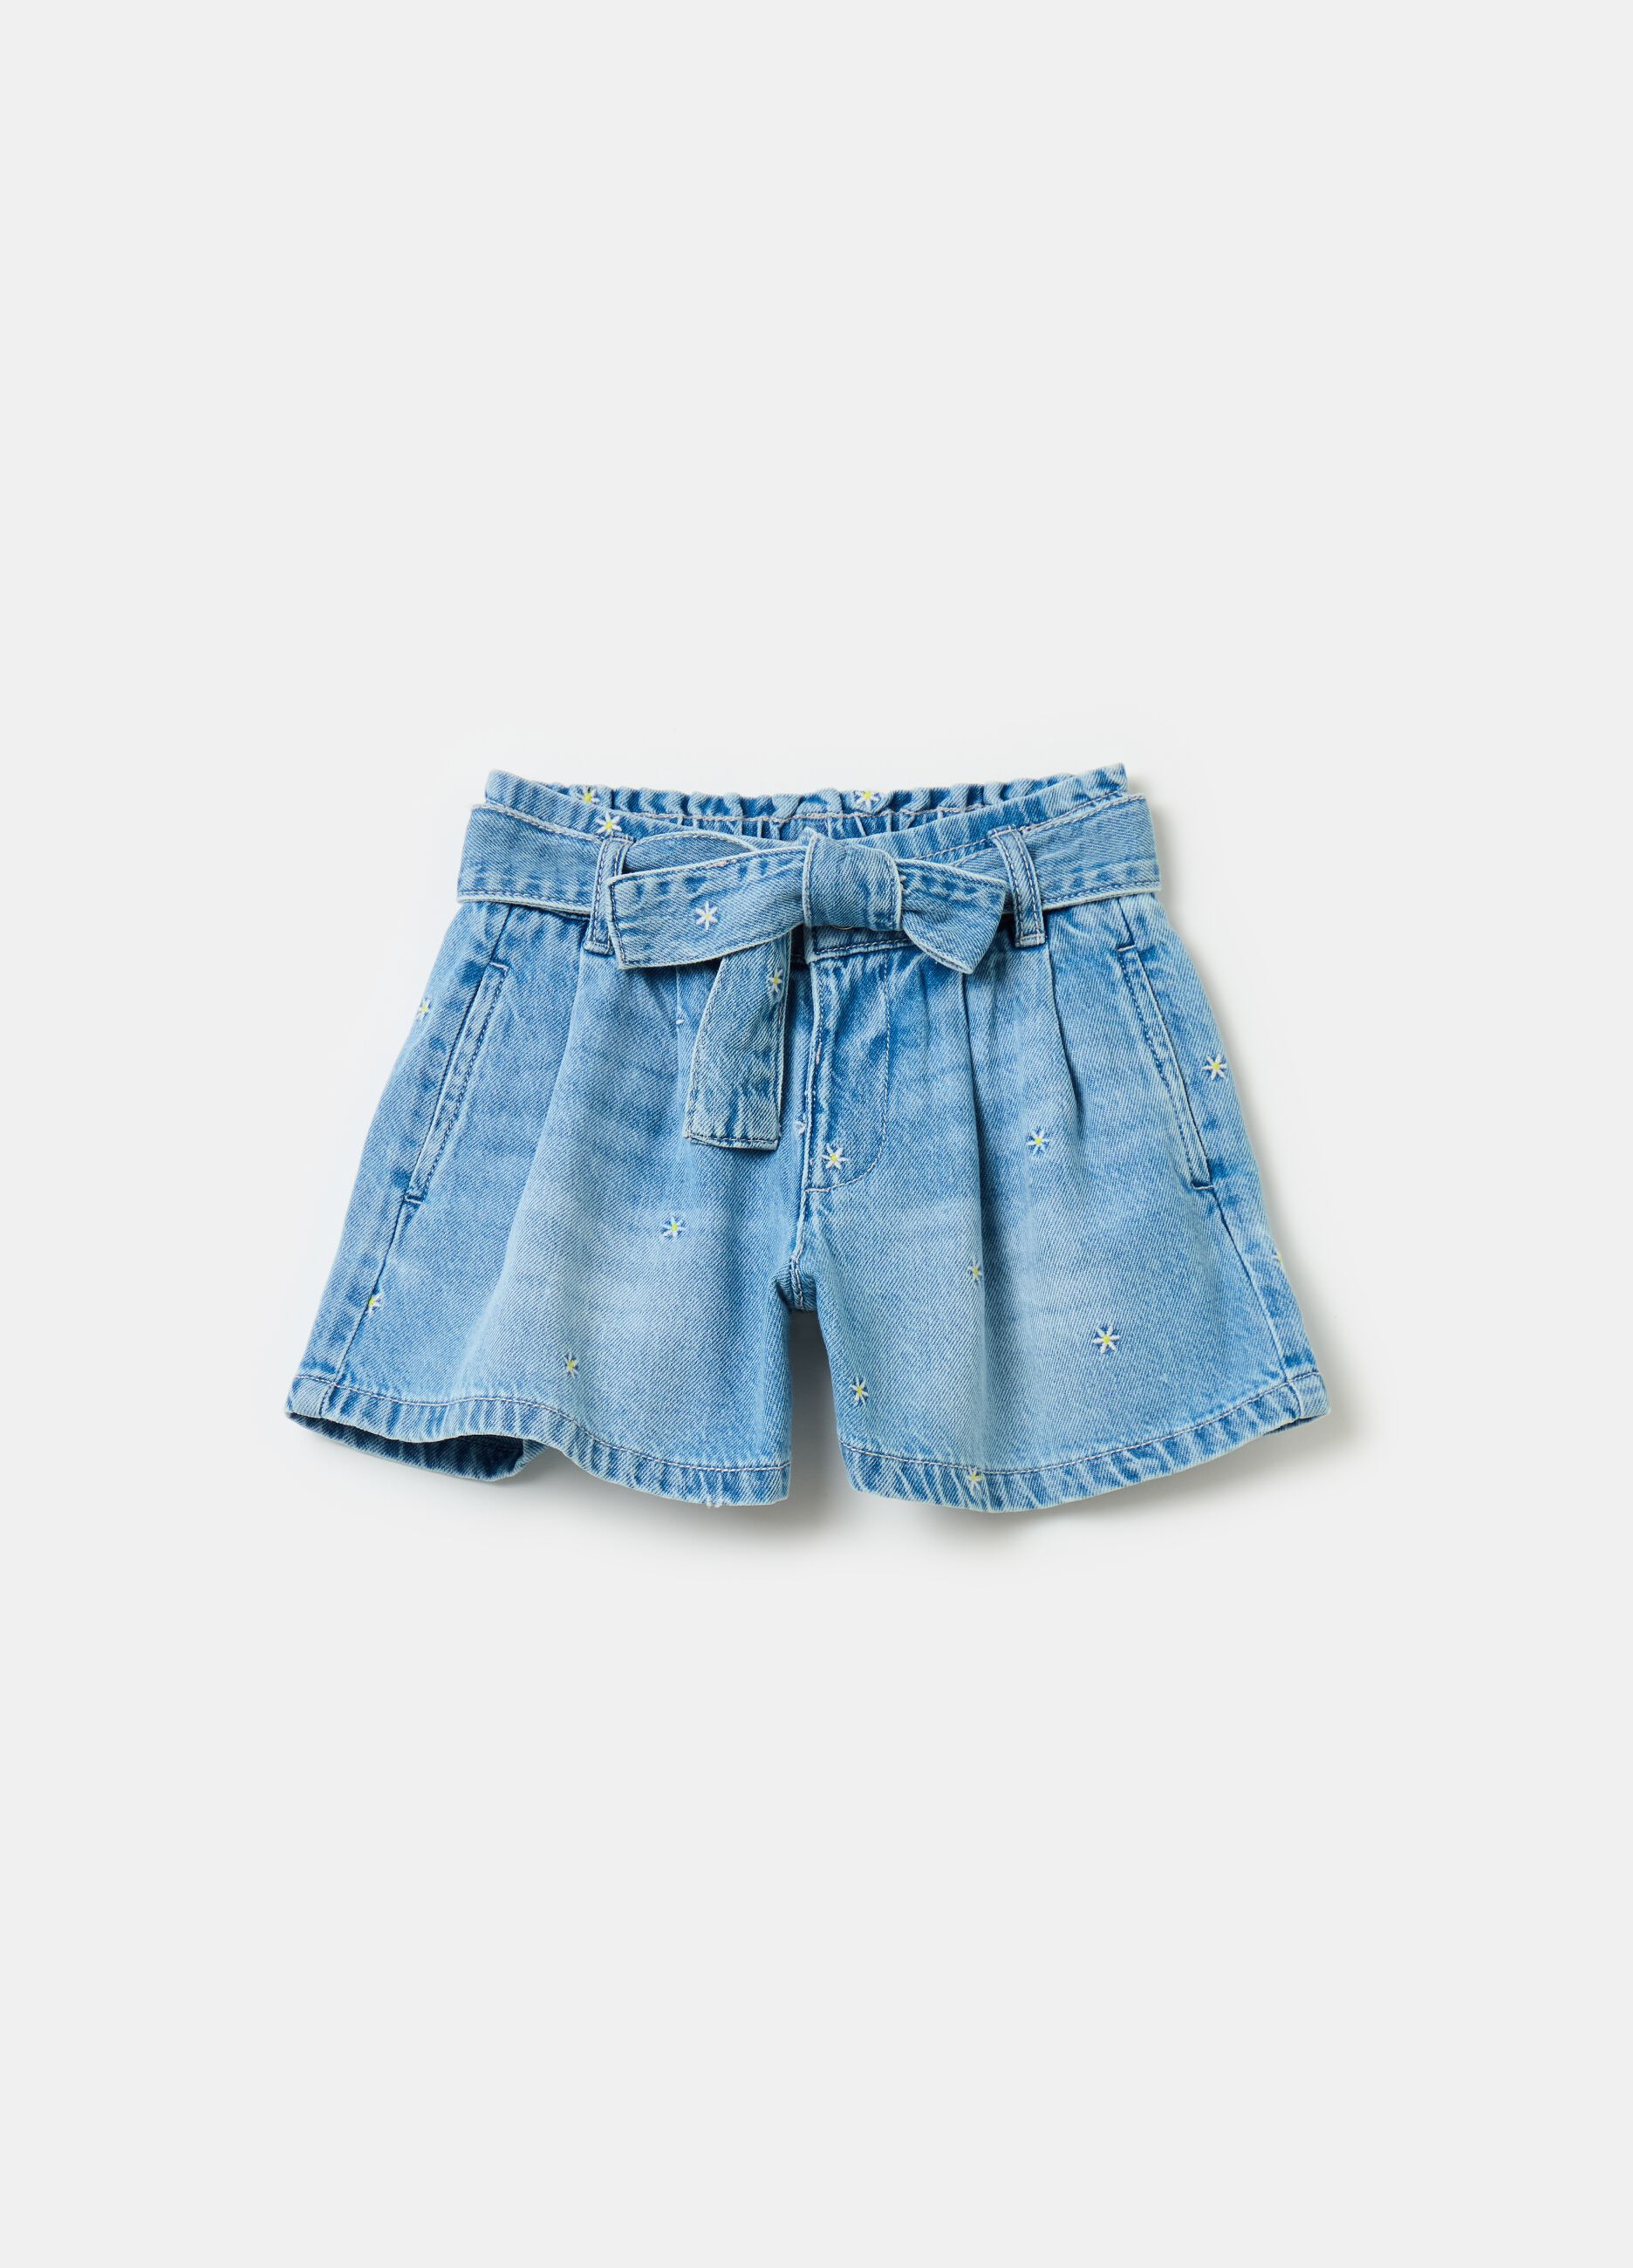 Denim shorts with small flowers embroidery